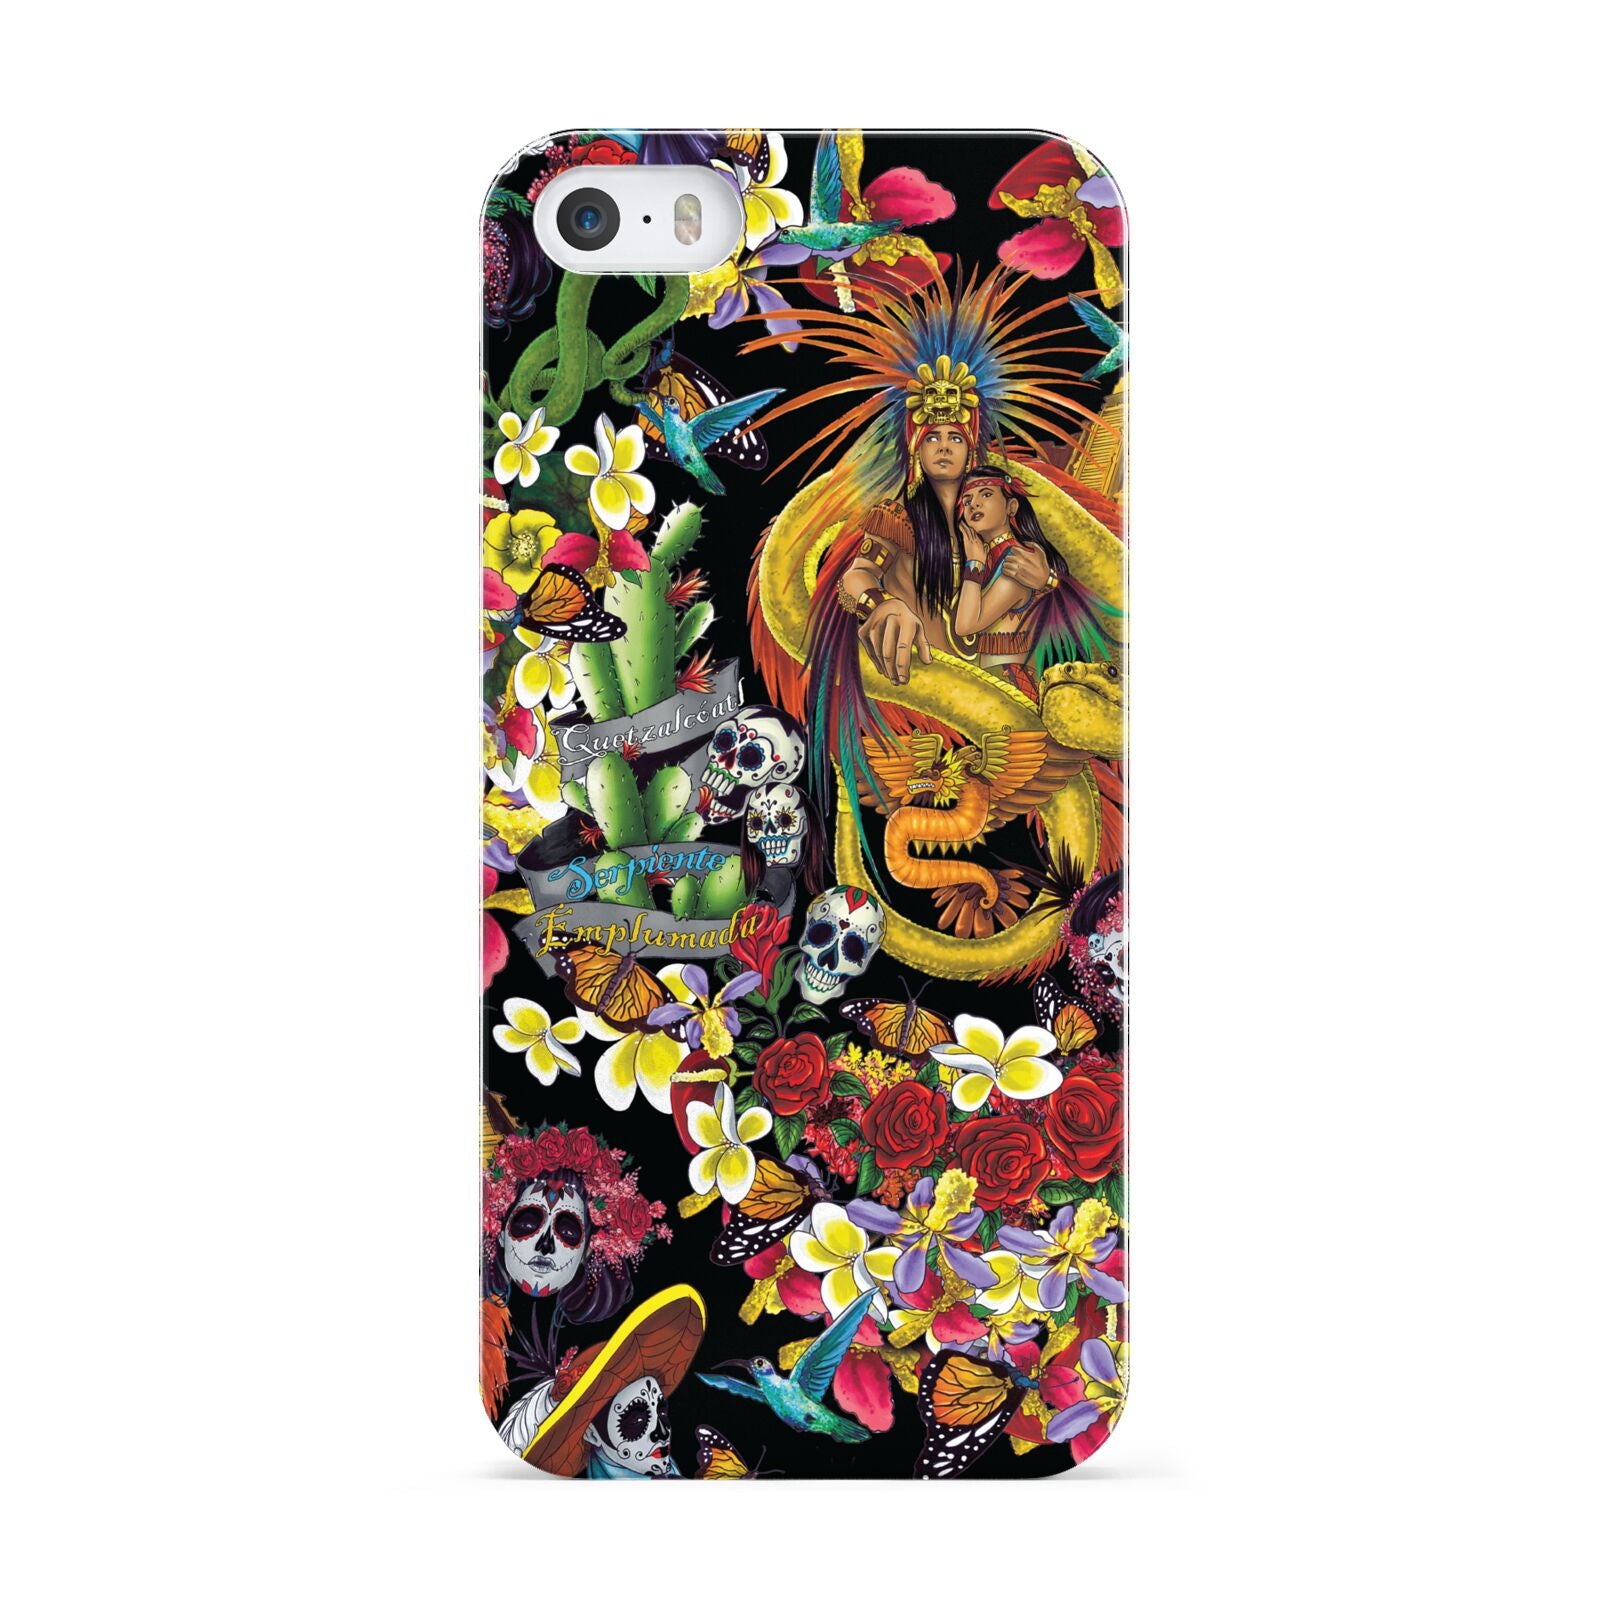 Day of the Dead Apple iPhone 5 Case